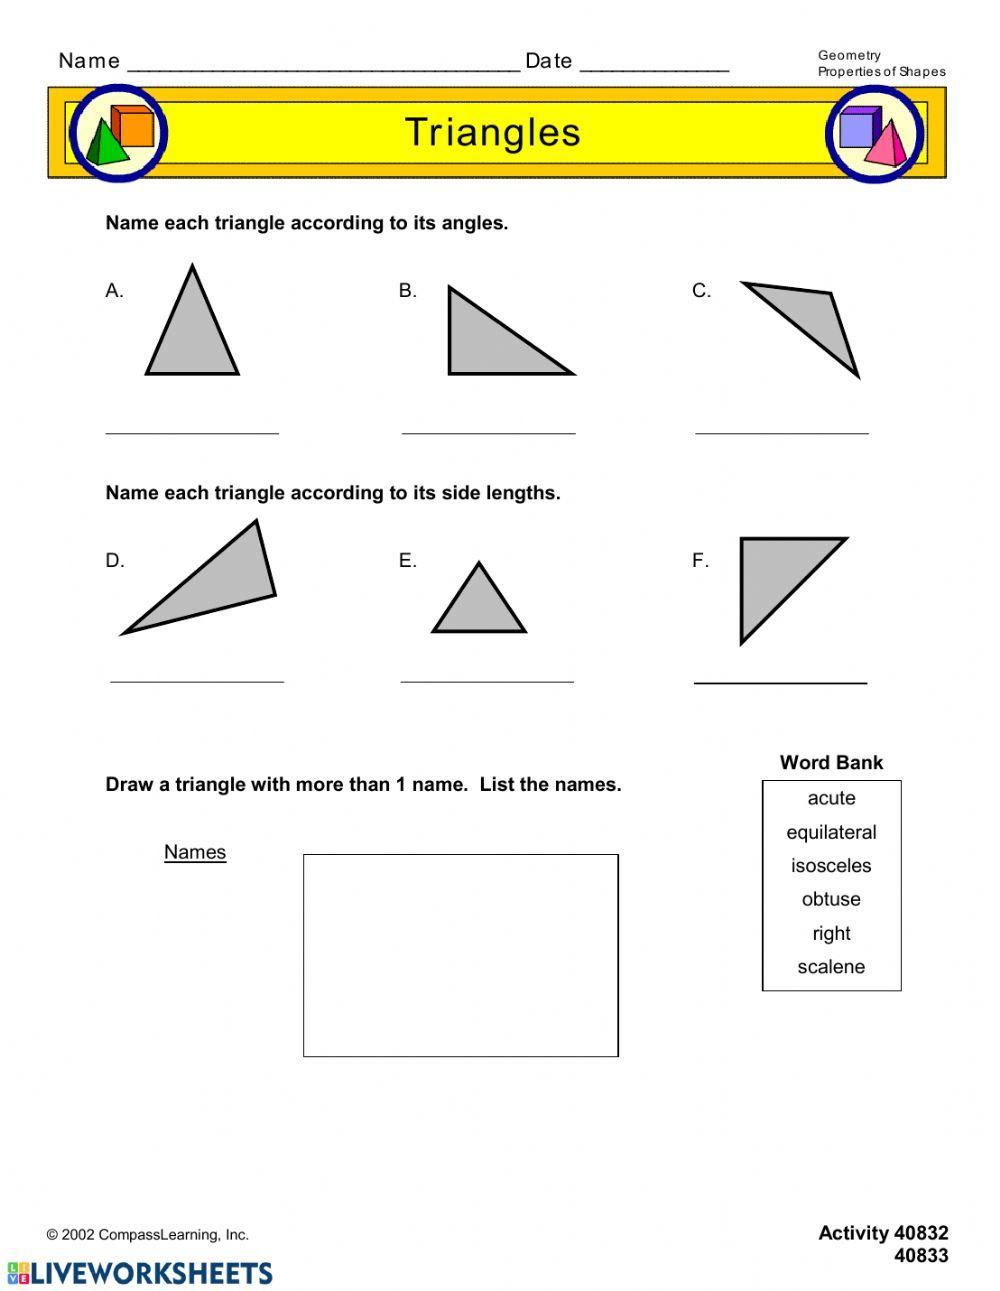 Classify Triangle According to Side Lengths